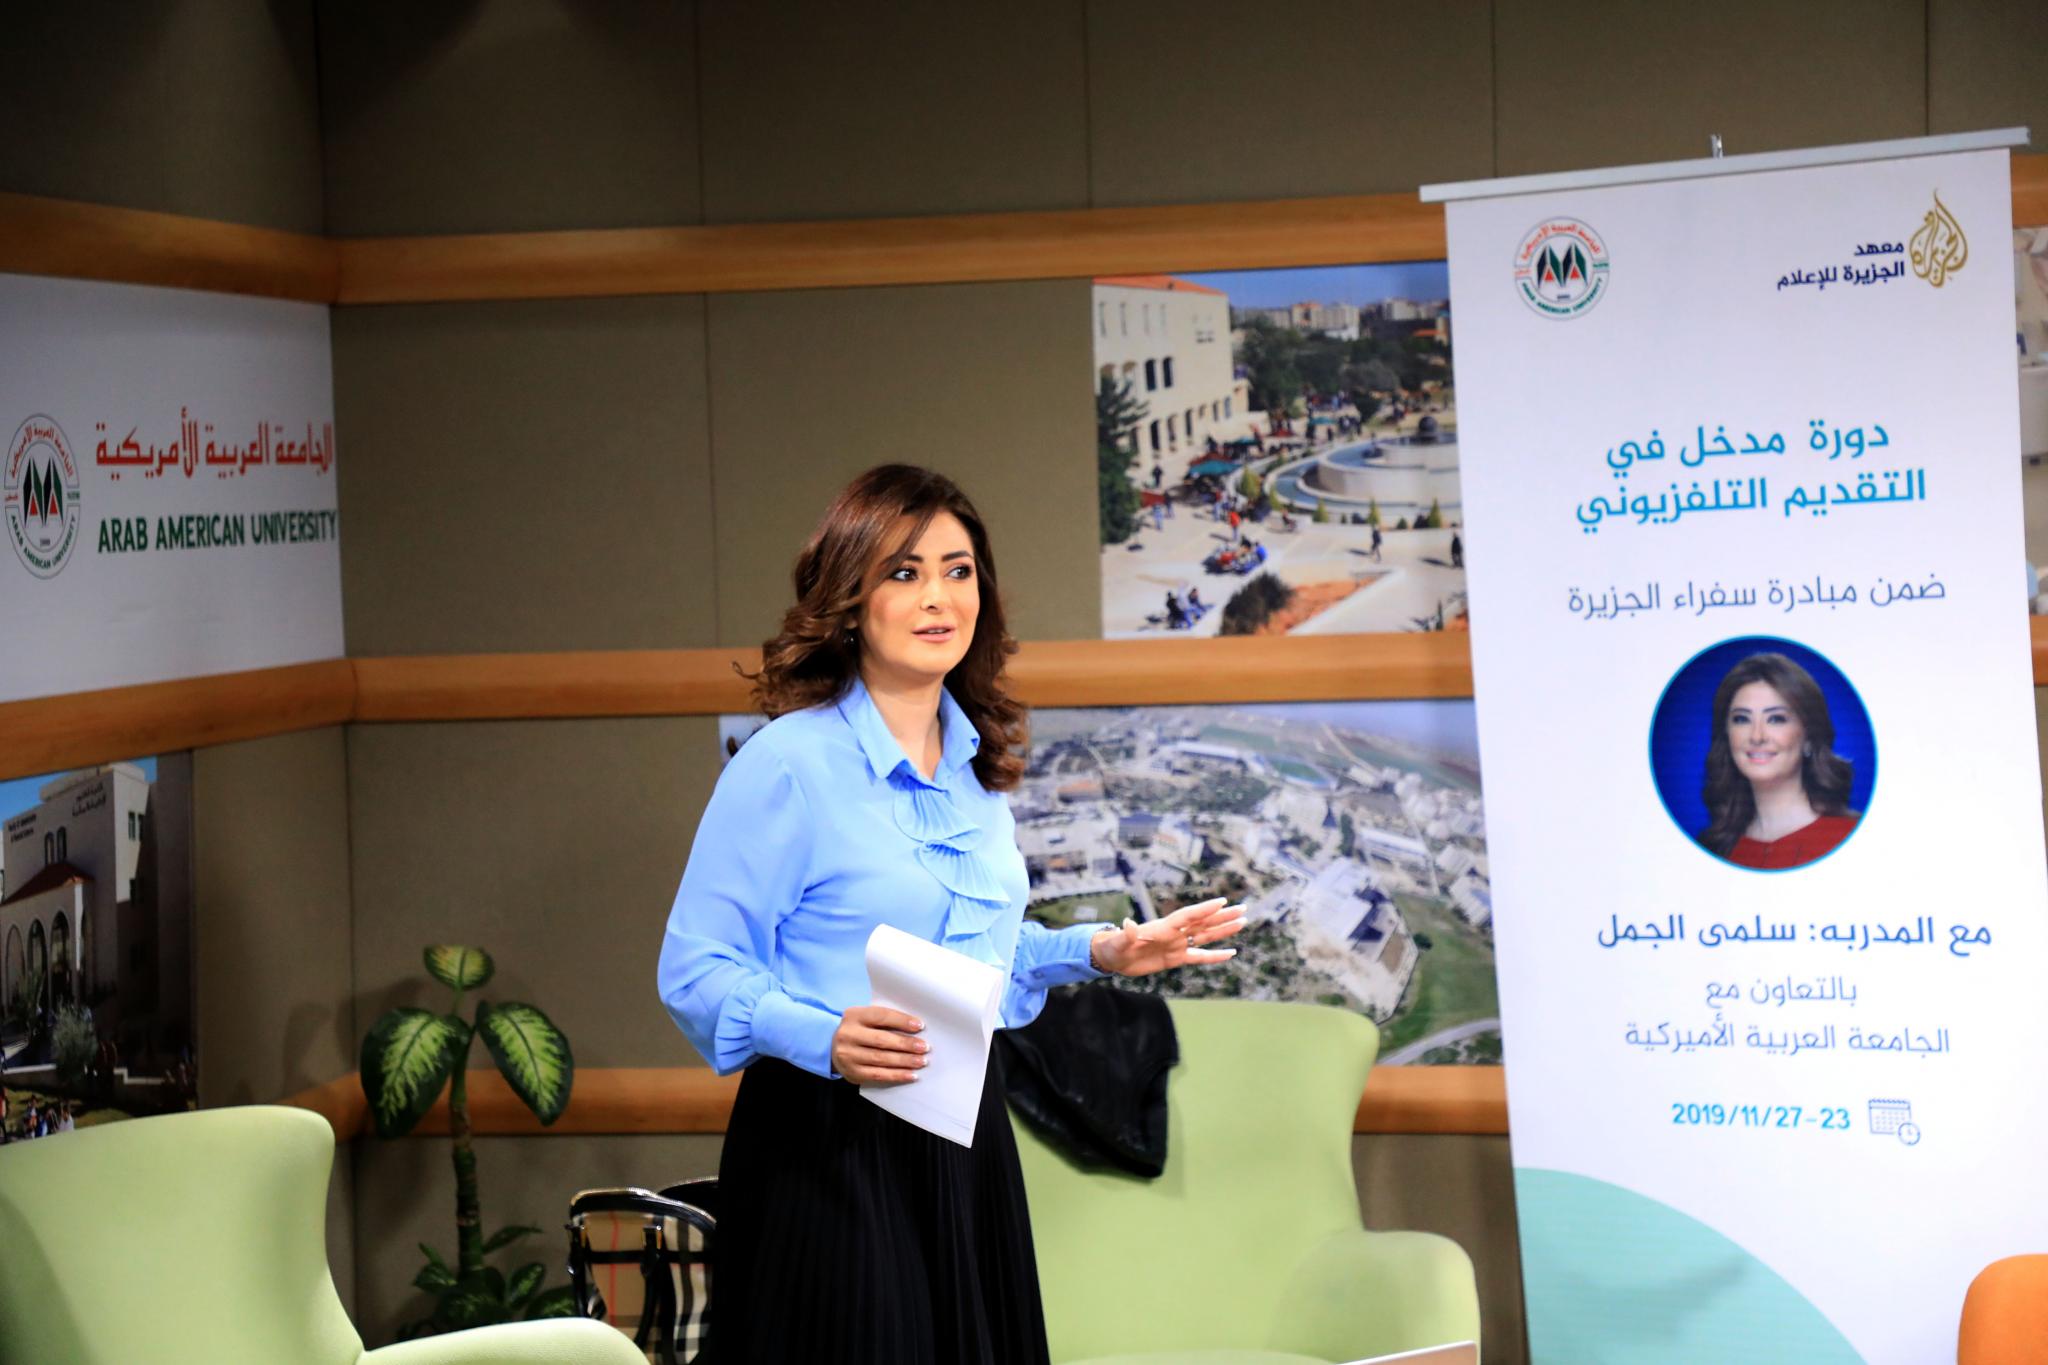 AAUP Hosts the TV Presenter in Al Jazeera, Ms. Salma AL Jamal to Give a Training Course About TV Broadcasting for Arabic Language and Media Students